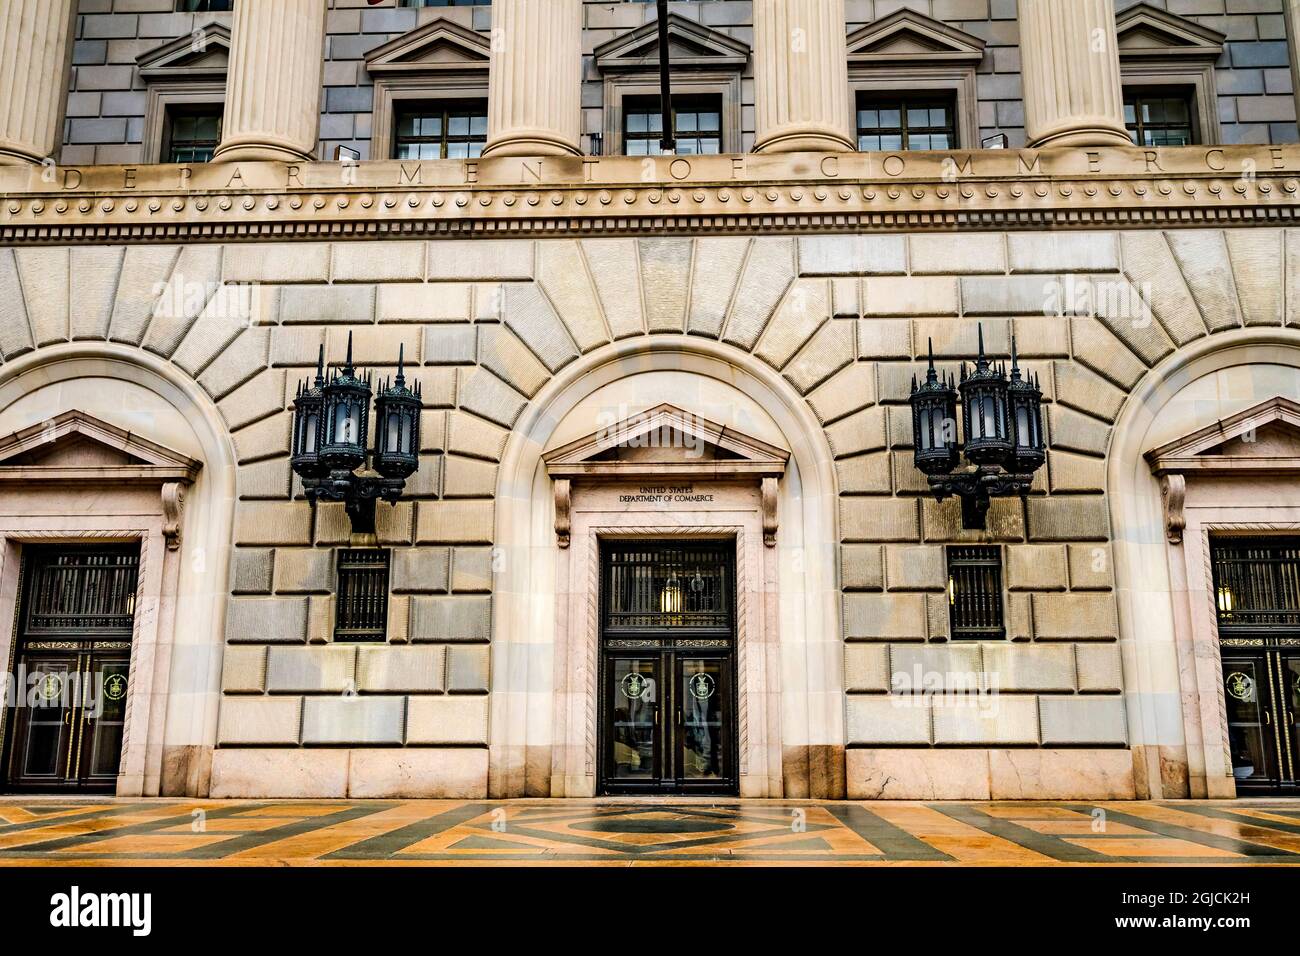 Main entrance to Herbert Hoover Building, Commerce Department, 14th Street, Washington DC, USA. Stock Photo